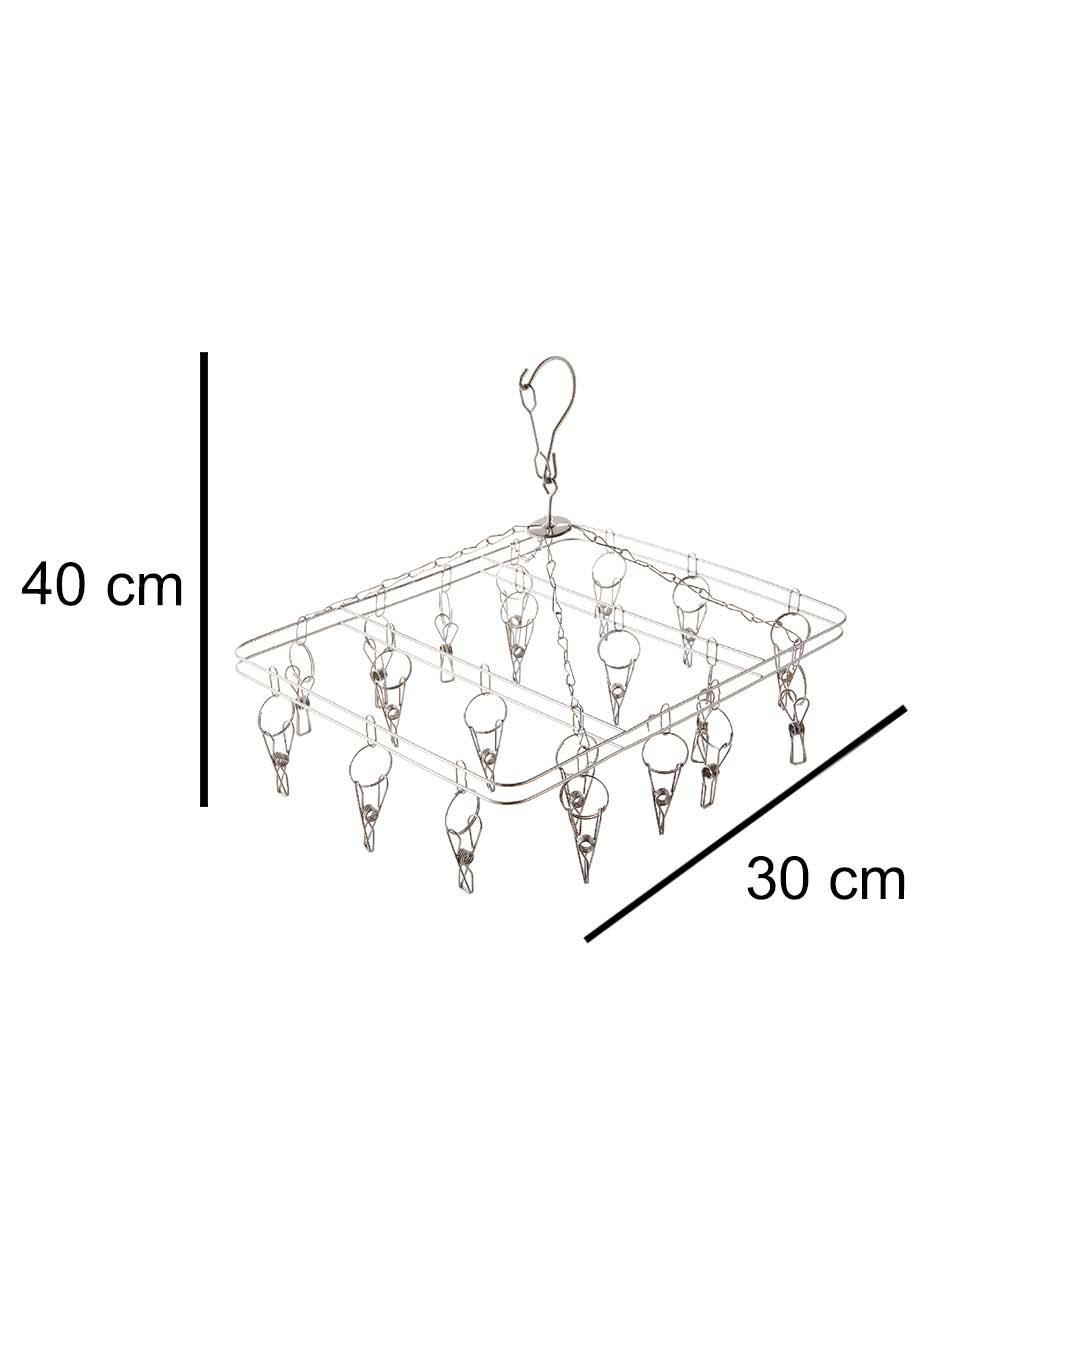 Clothes Drying Hanger, Silver, Iron - MARKET 99